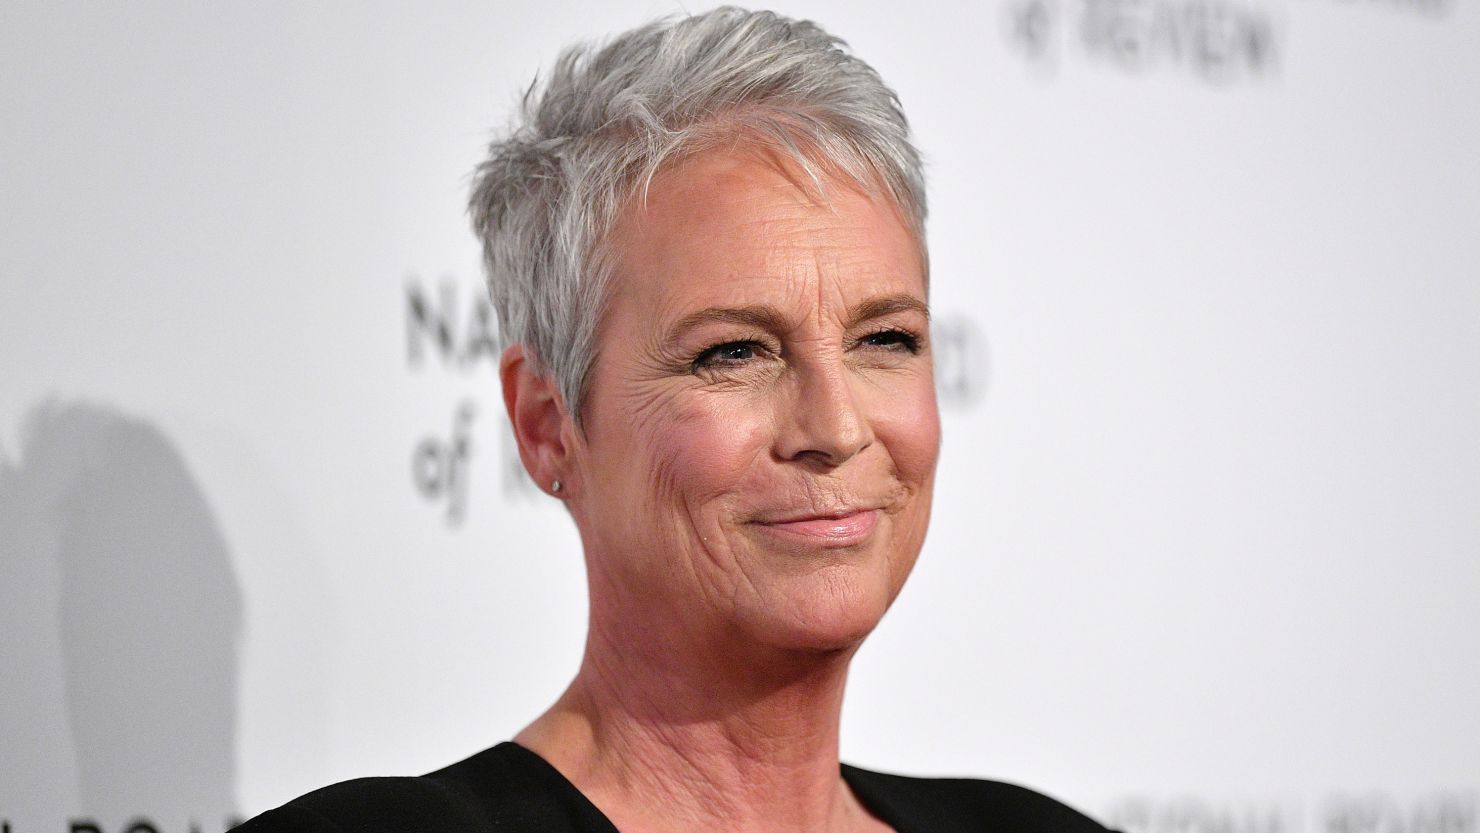 Jamie Lee Curtis attends the 2020 National Board Of Review Gala in New York City.